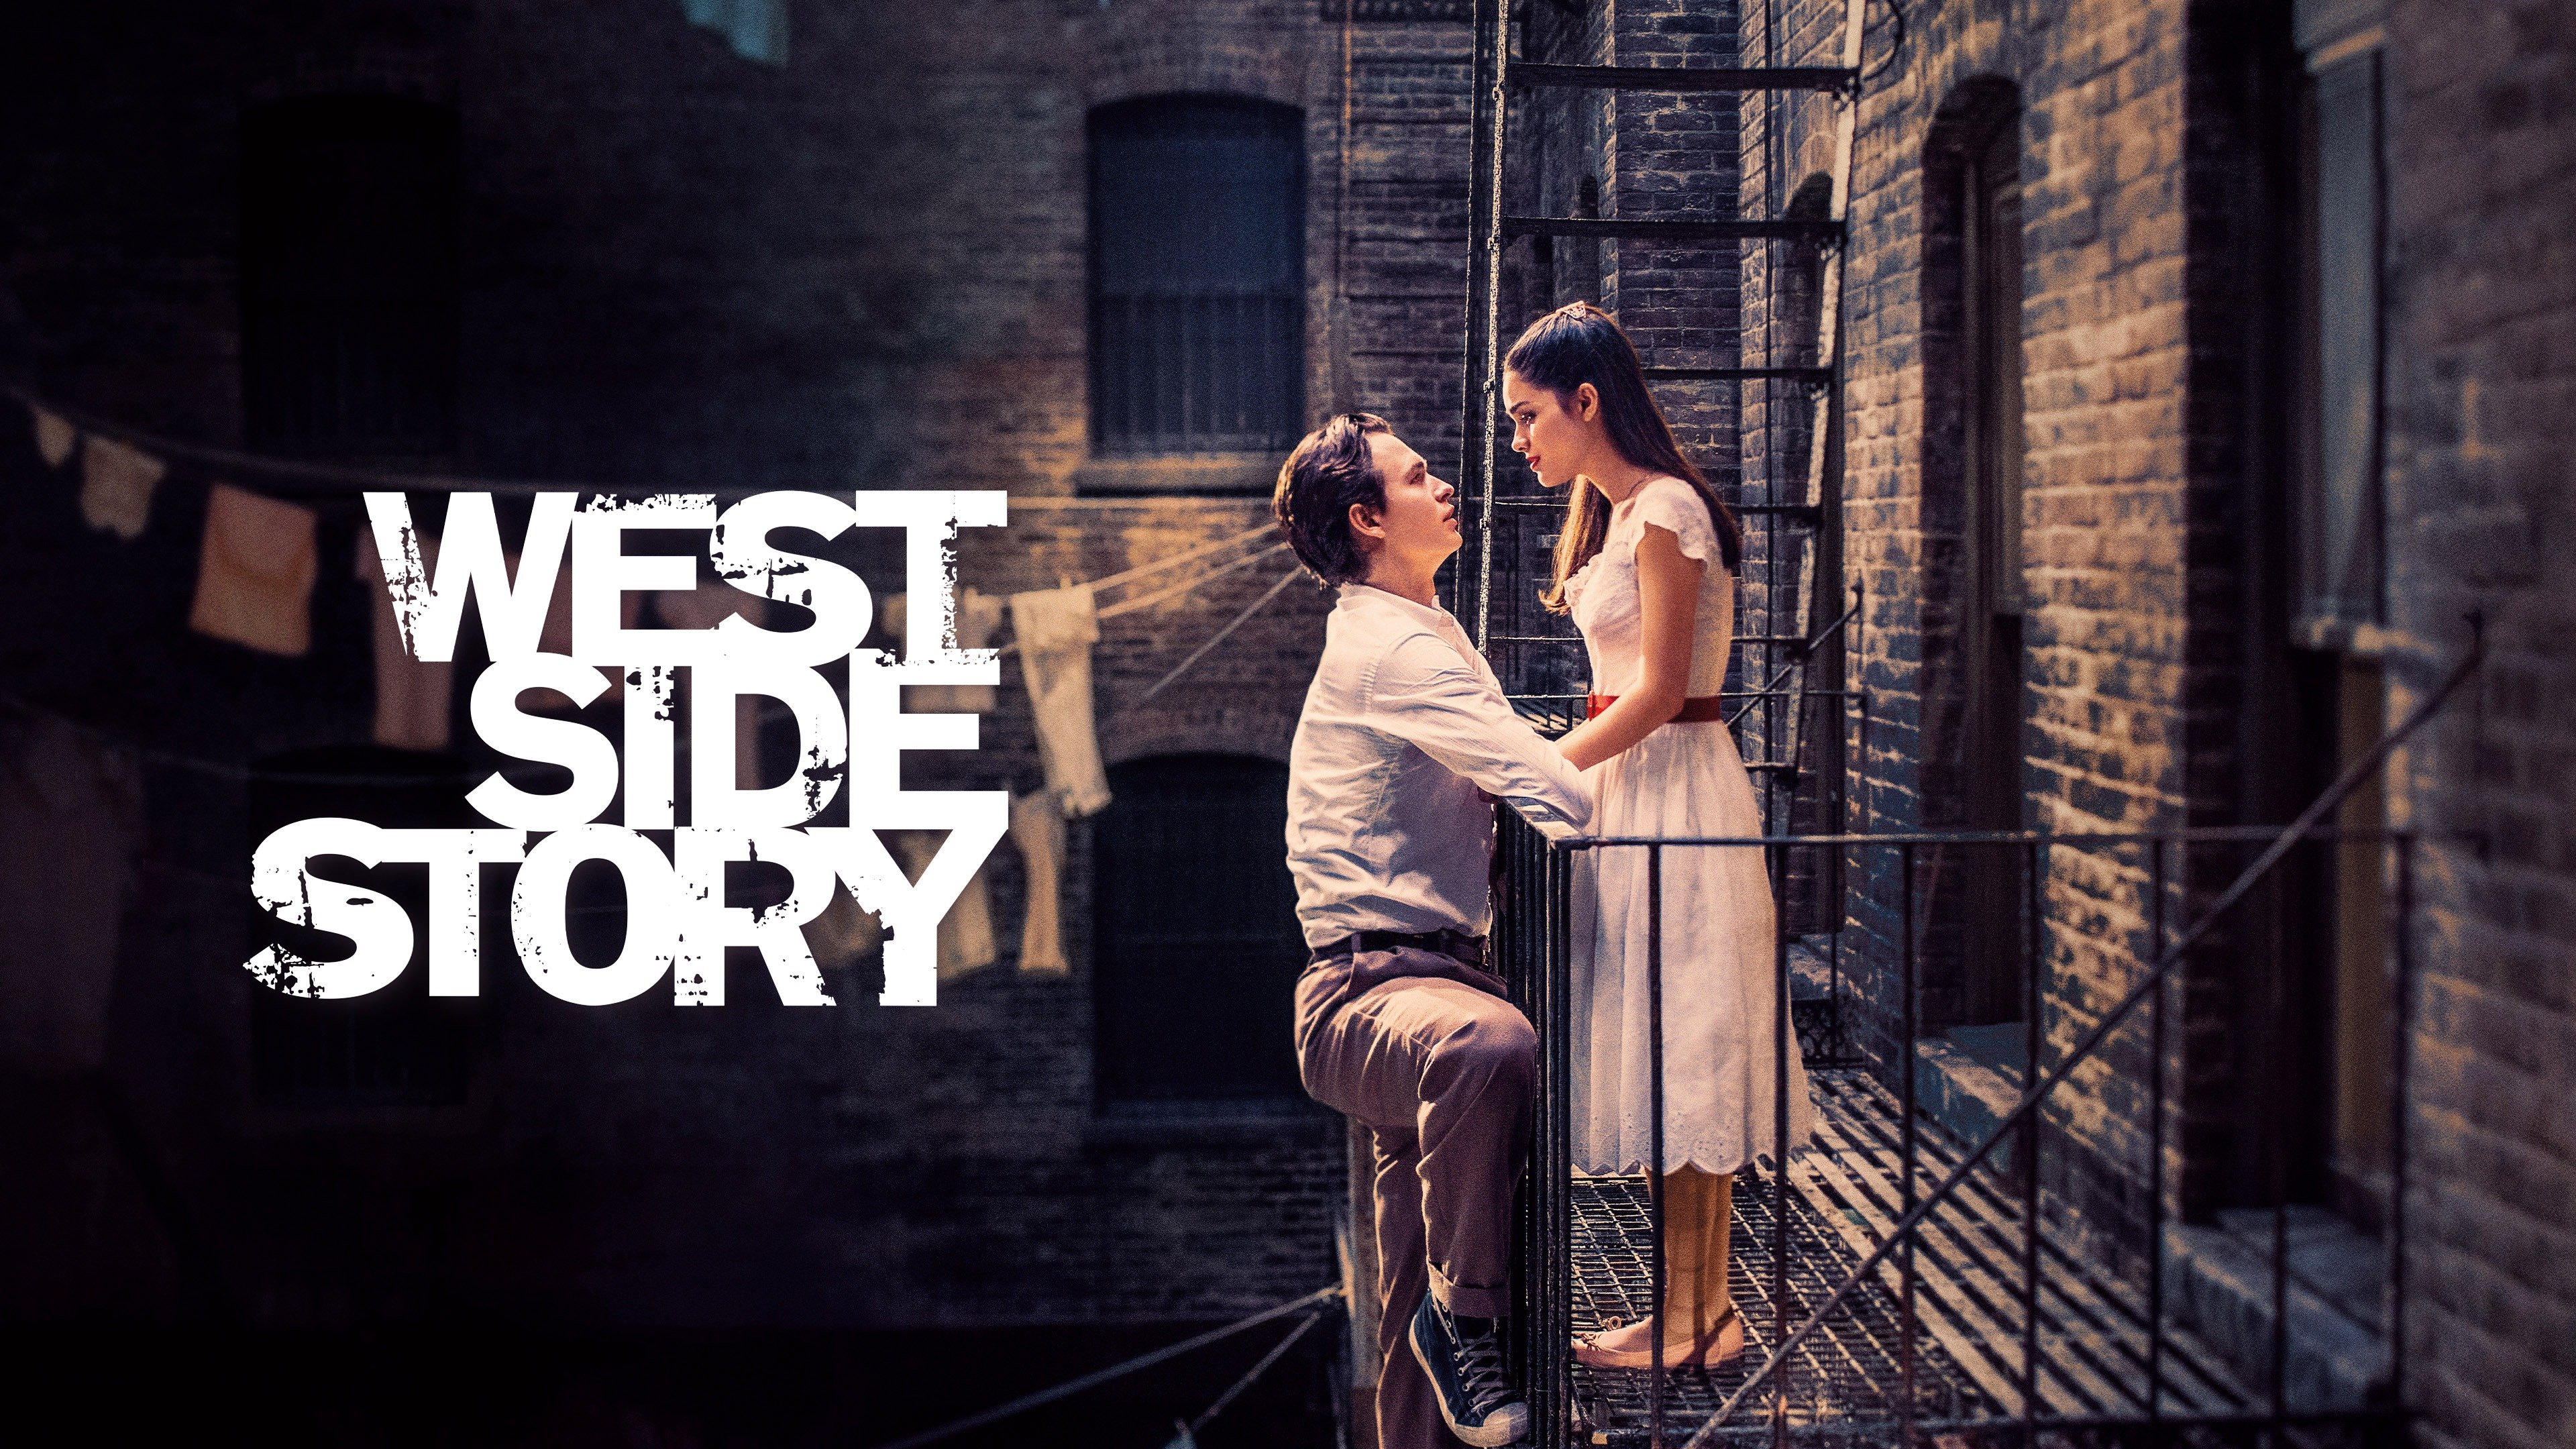 20 West Side Story 2021 HD Wallpapers and Backgrounds